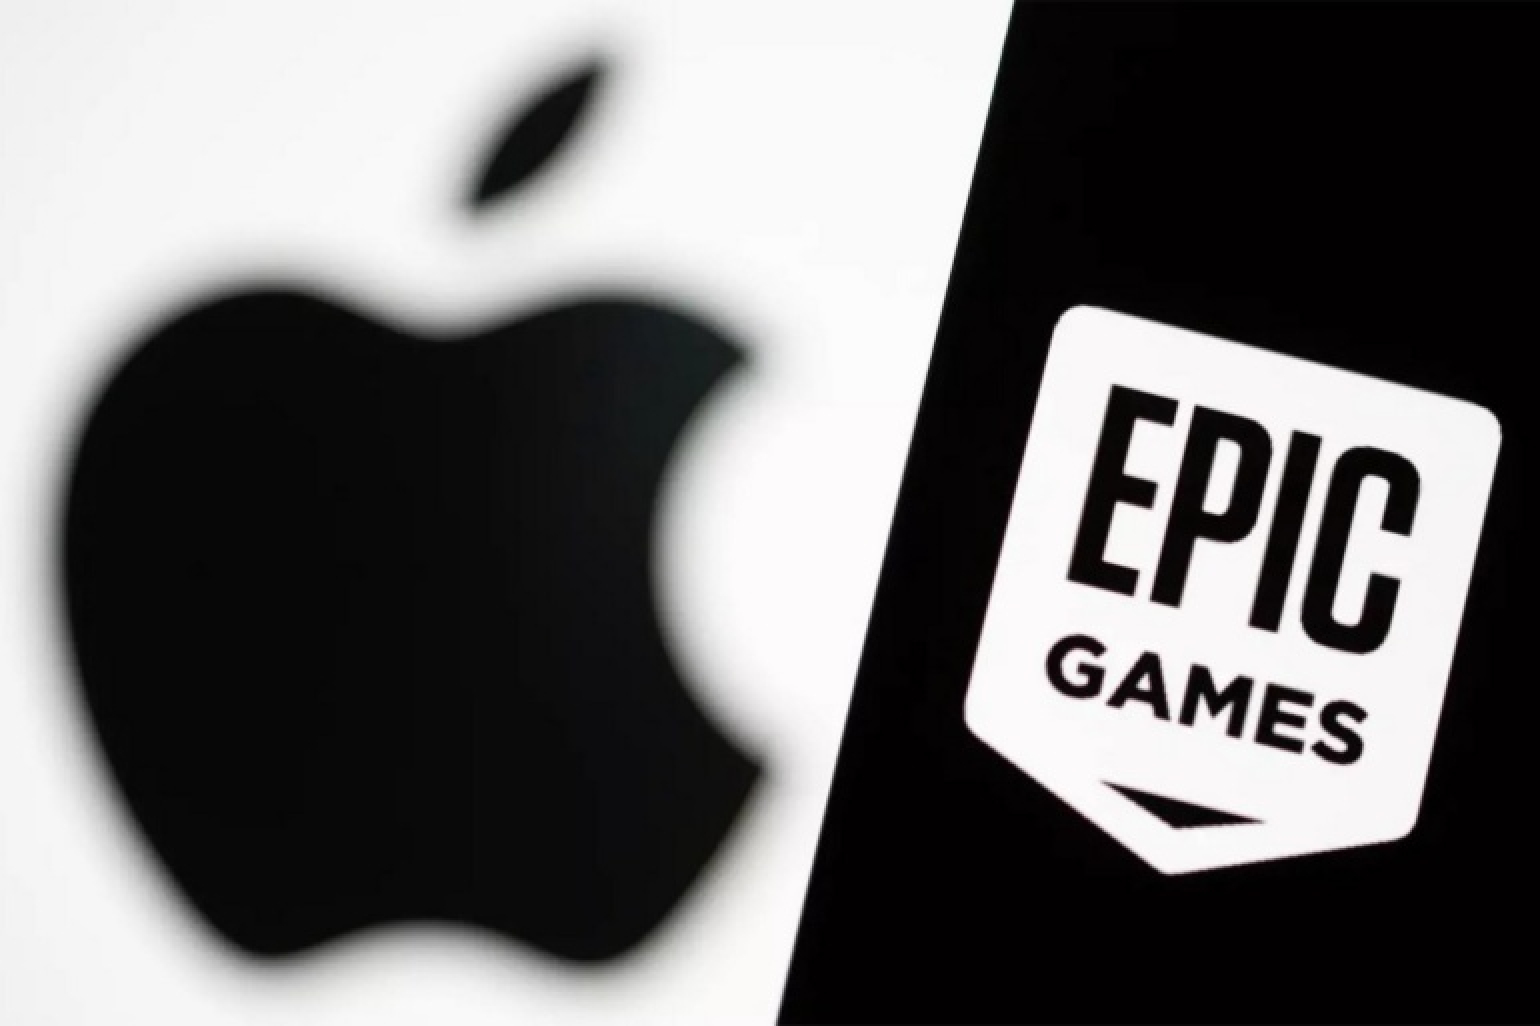 Apple banned Epic Games developer's account due to "unreliability" - EGS on iOS delayed for now